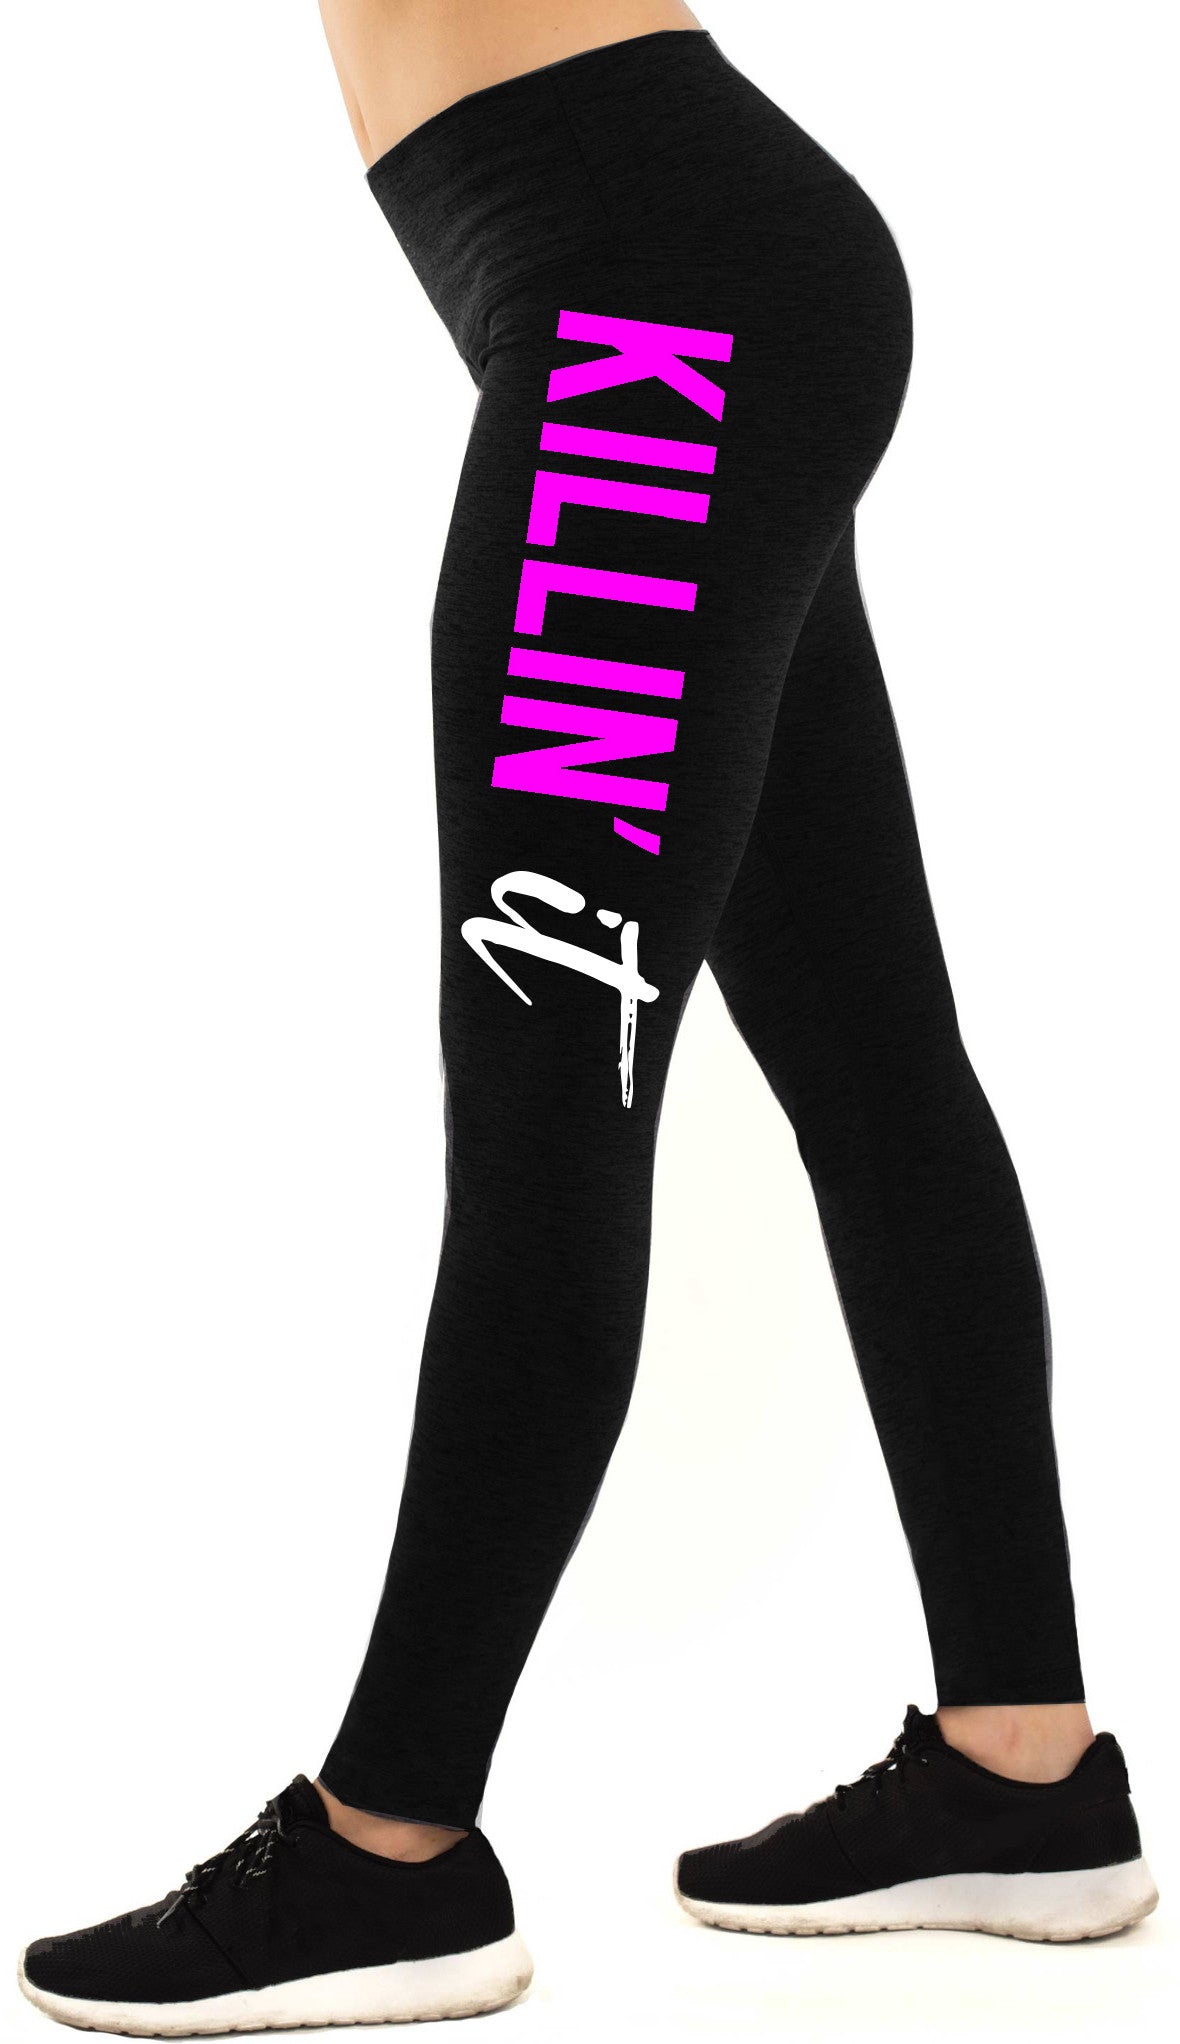 White IT Print Leggings, with Workout Black and Pink Apparel – KILLIN\' NobullWoman